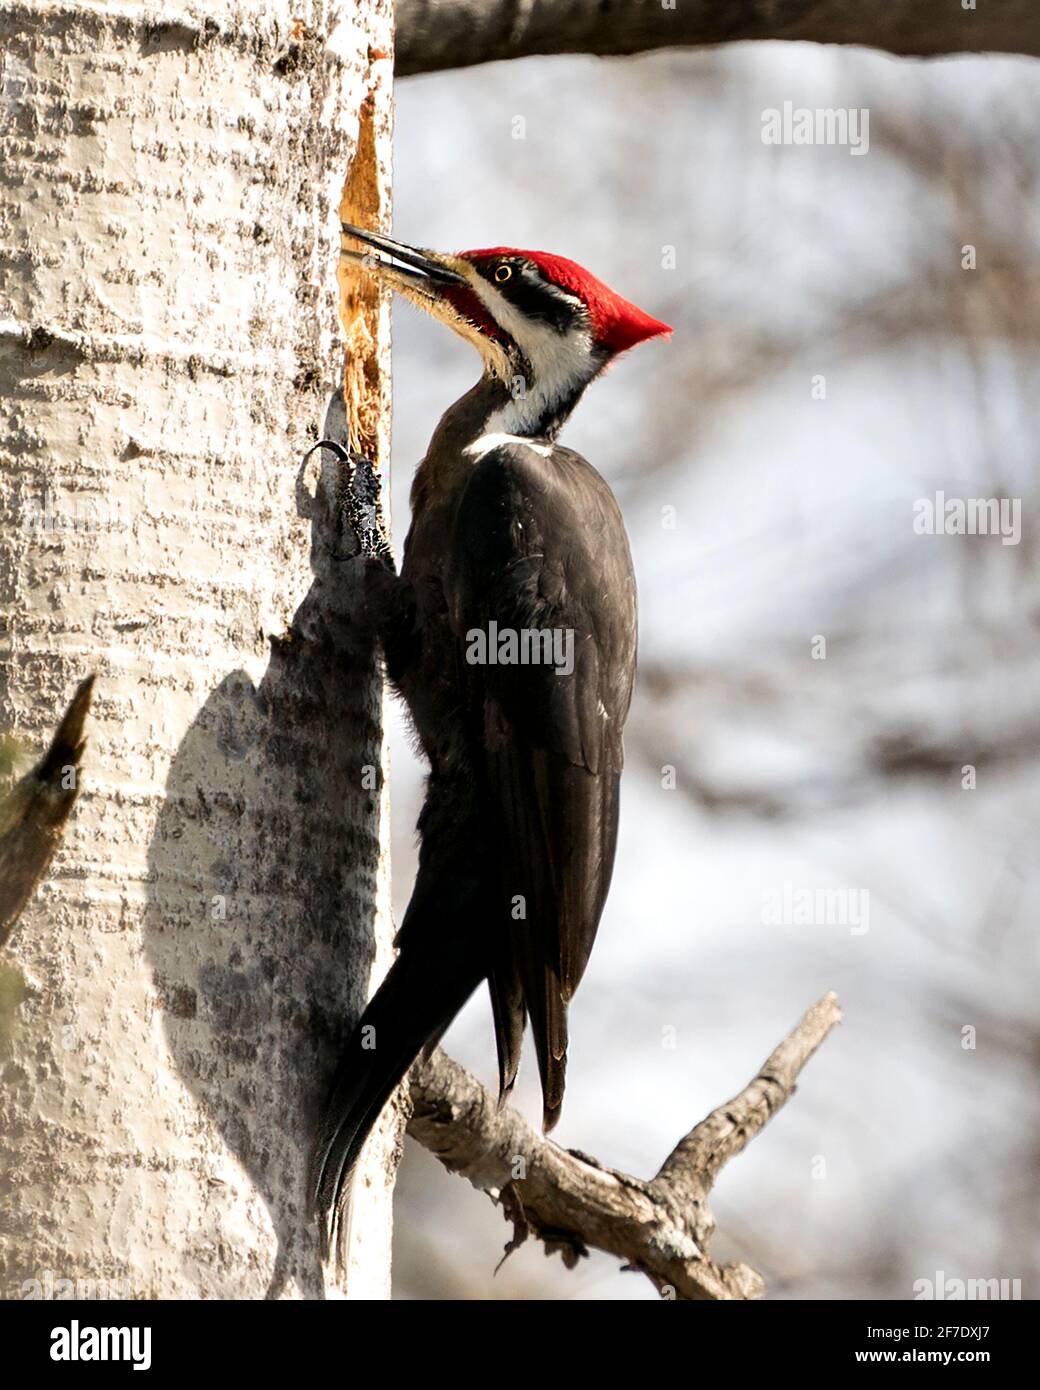 Woodpecker bird close-up profile view perched on a tree trunk with blur background in its environment and habitat drumming a hole in the tree. Pileate Stock Photo